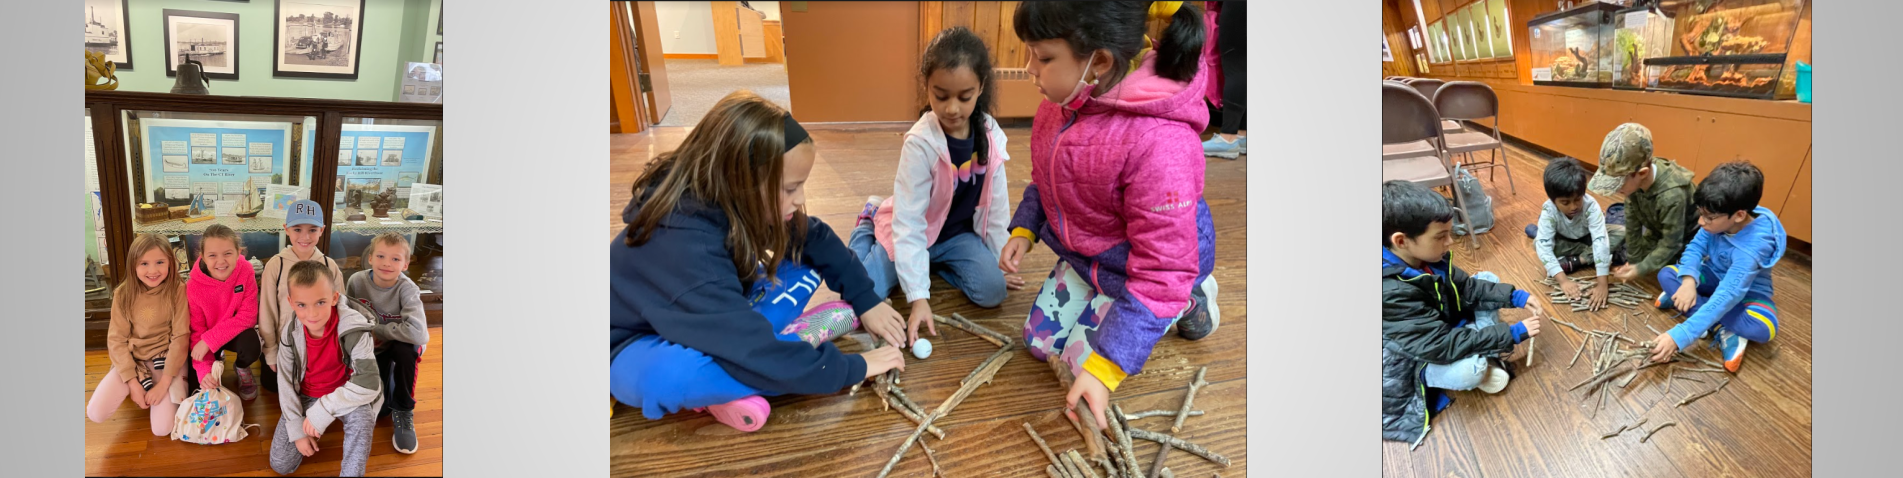 Students working on a team building activity during a field trip